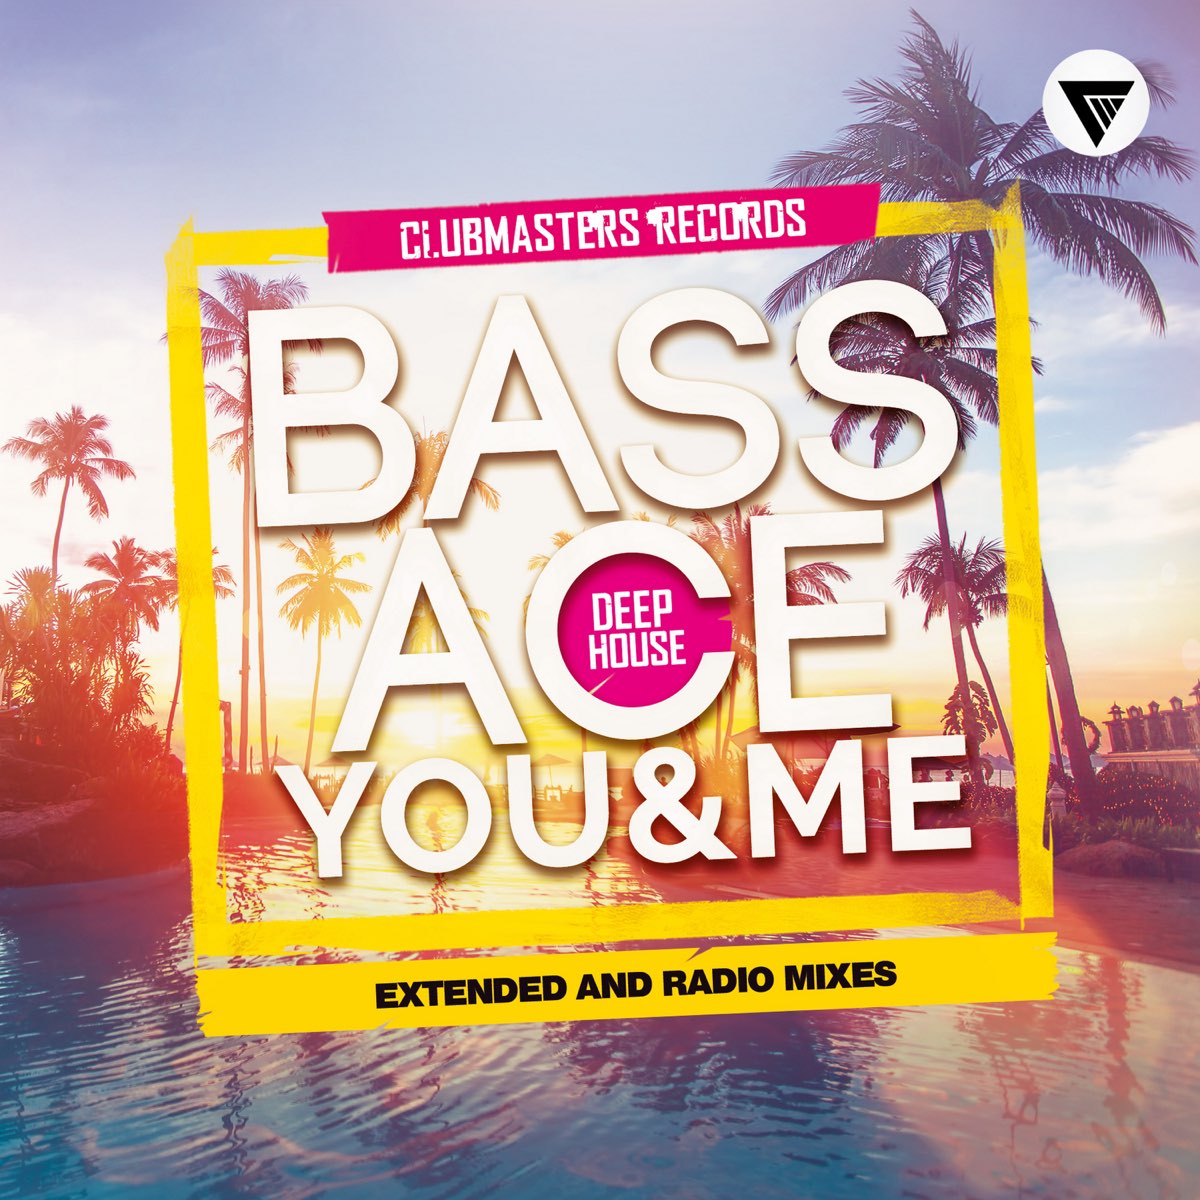 Bass Ace - coming on. Rain Bass Ace. Bass Ace - if you Love me.